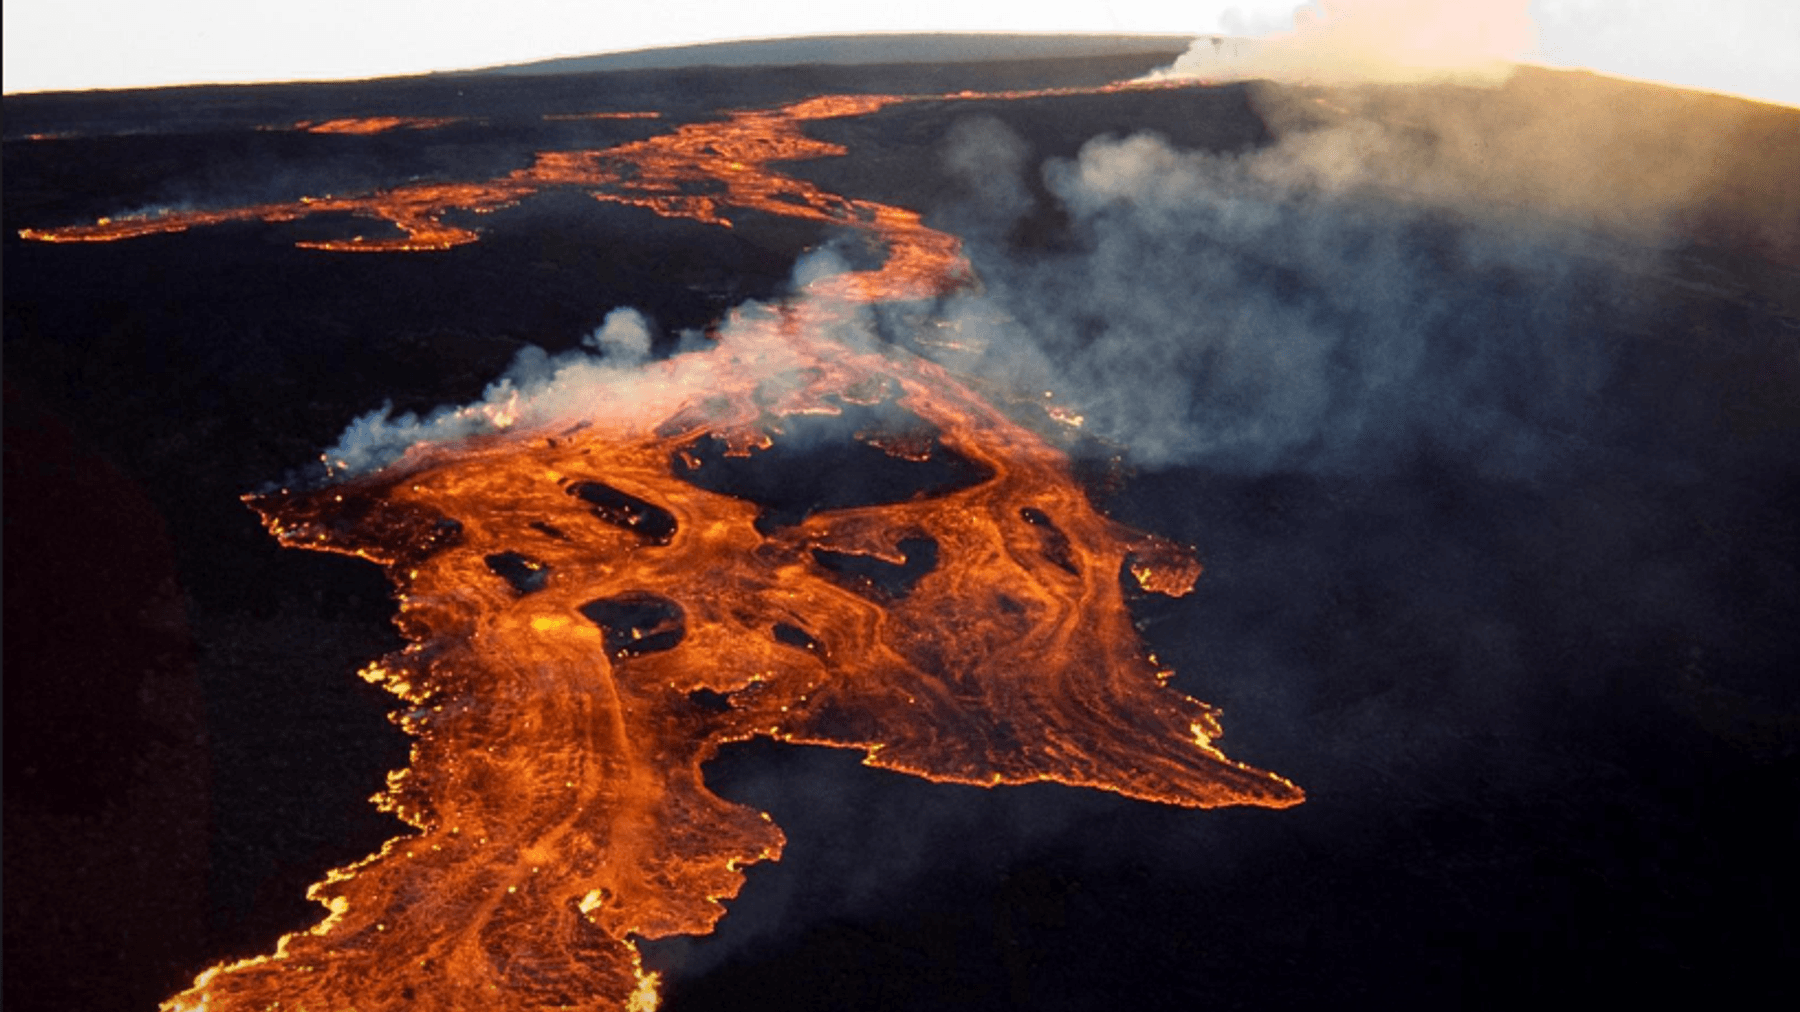 The world’s largest volcano, Mauna Loa, erupted in Hawaii